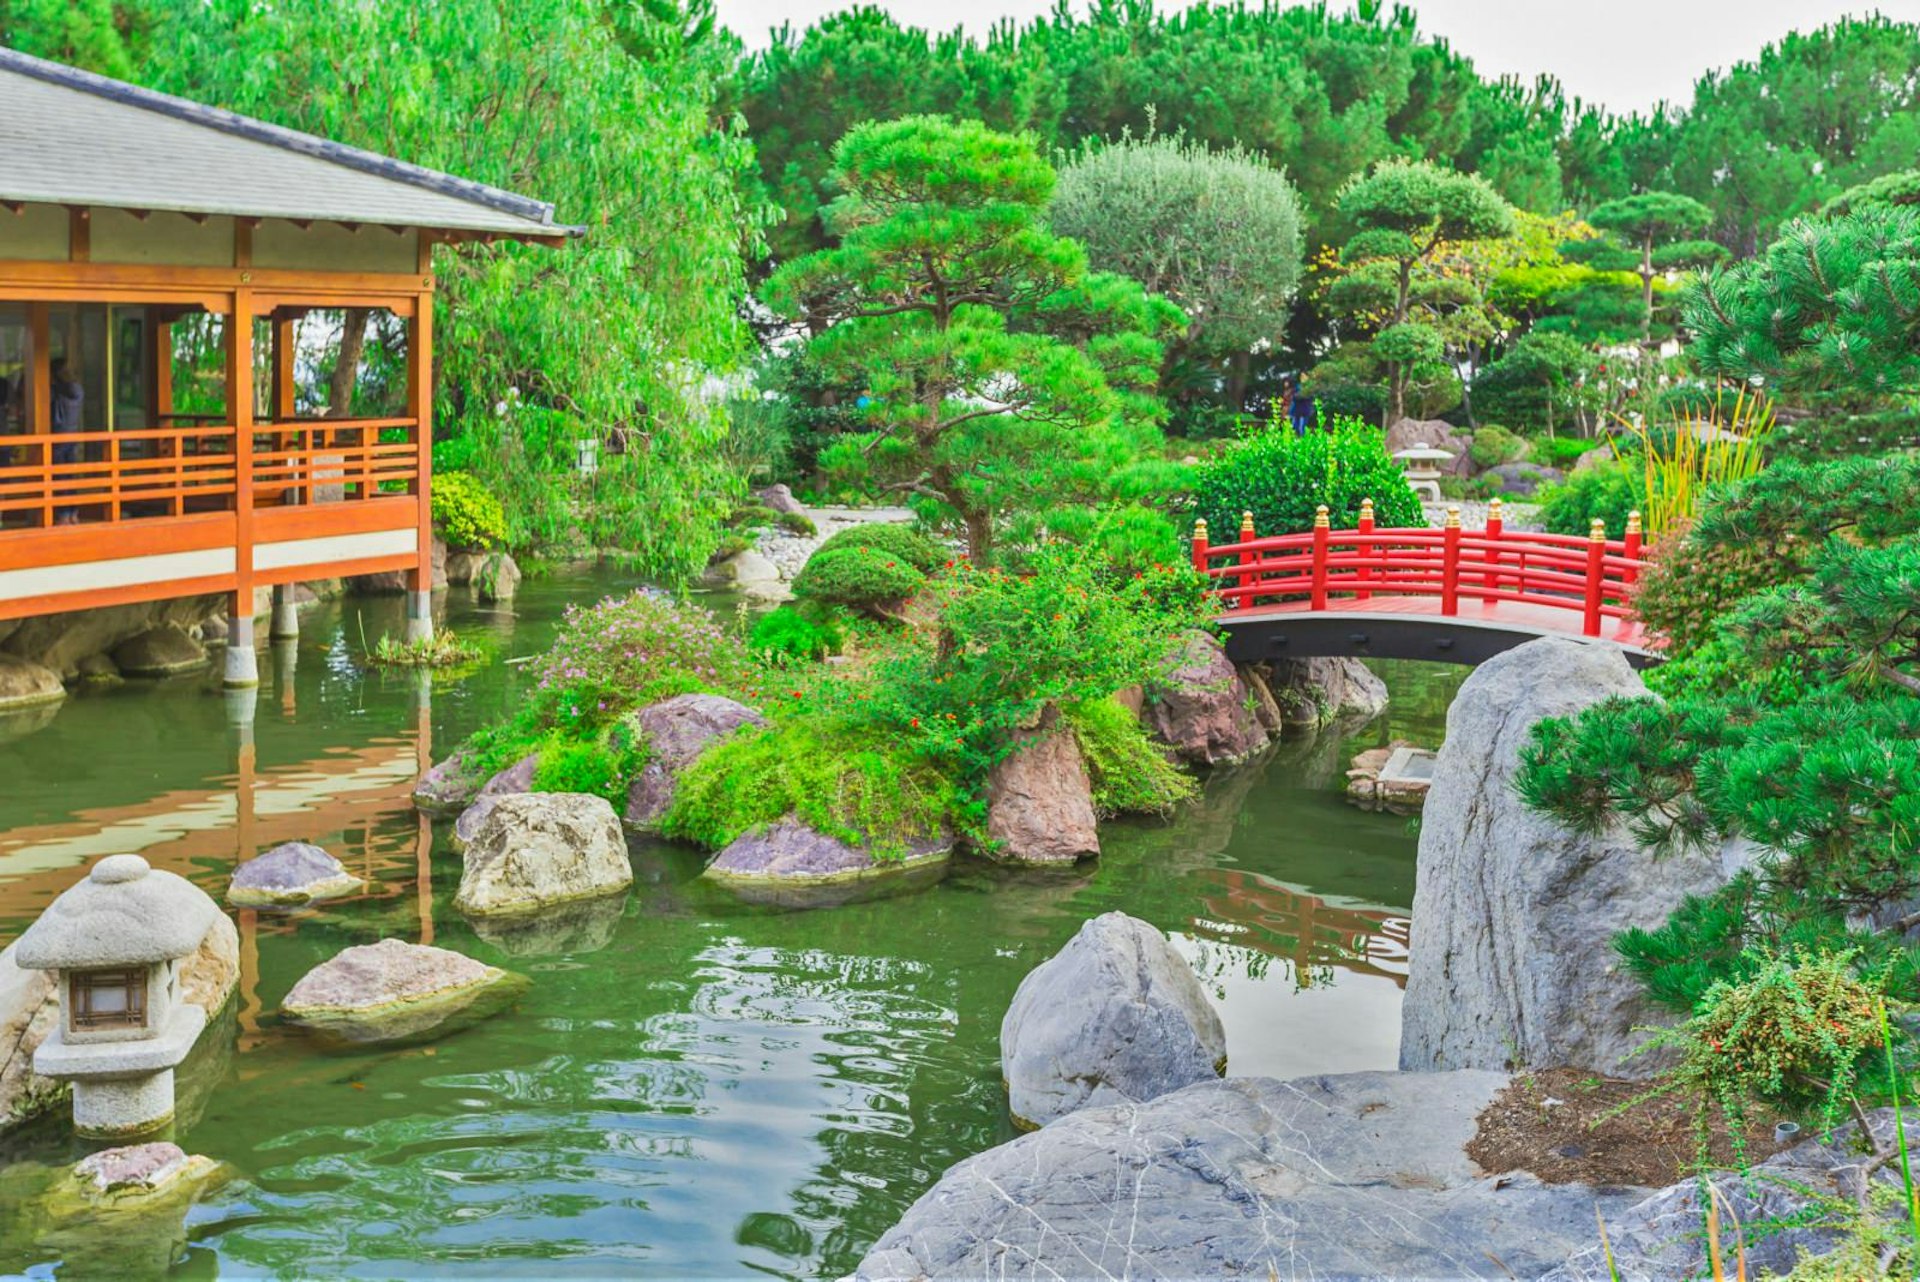 The Japanese Garden in Monaco with a Shinto tea house and red arched bridge